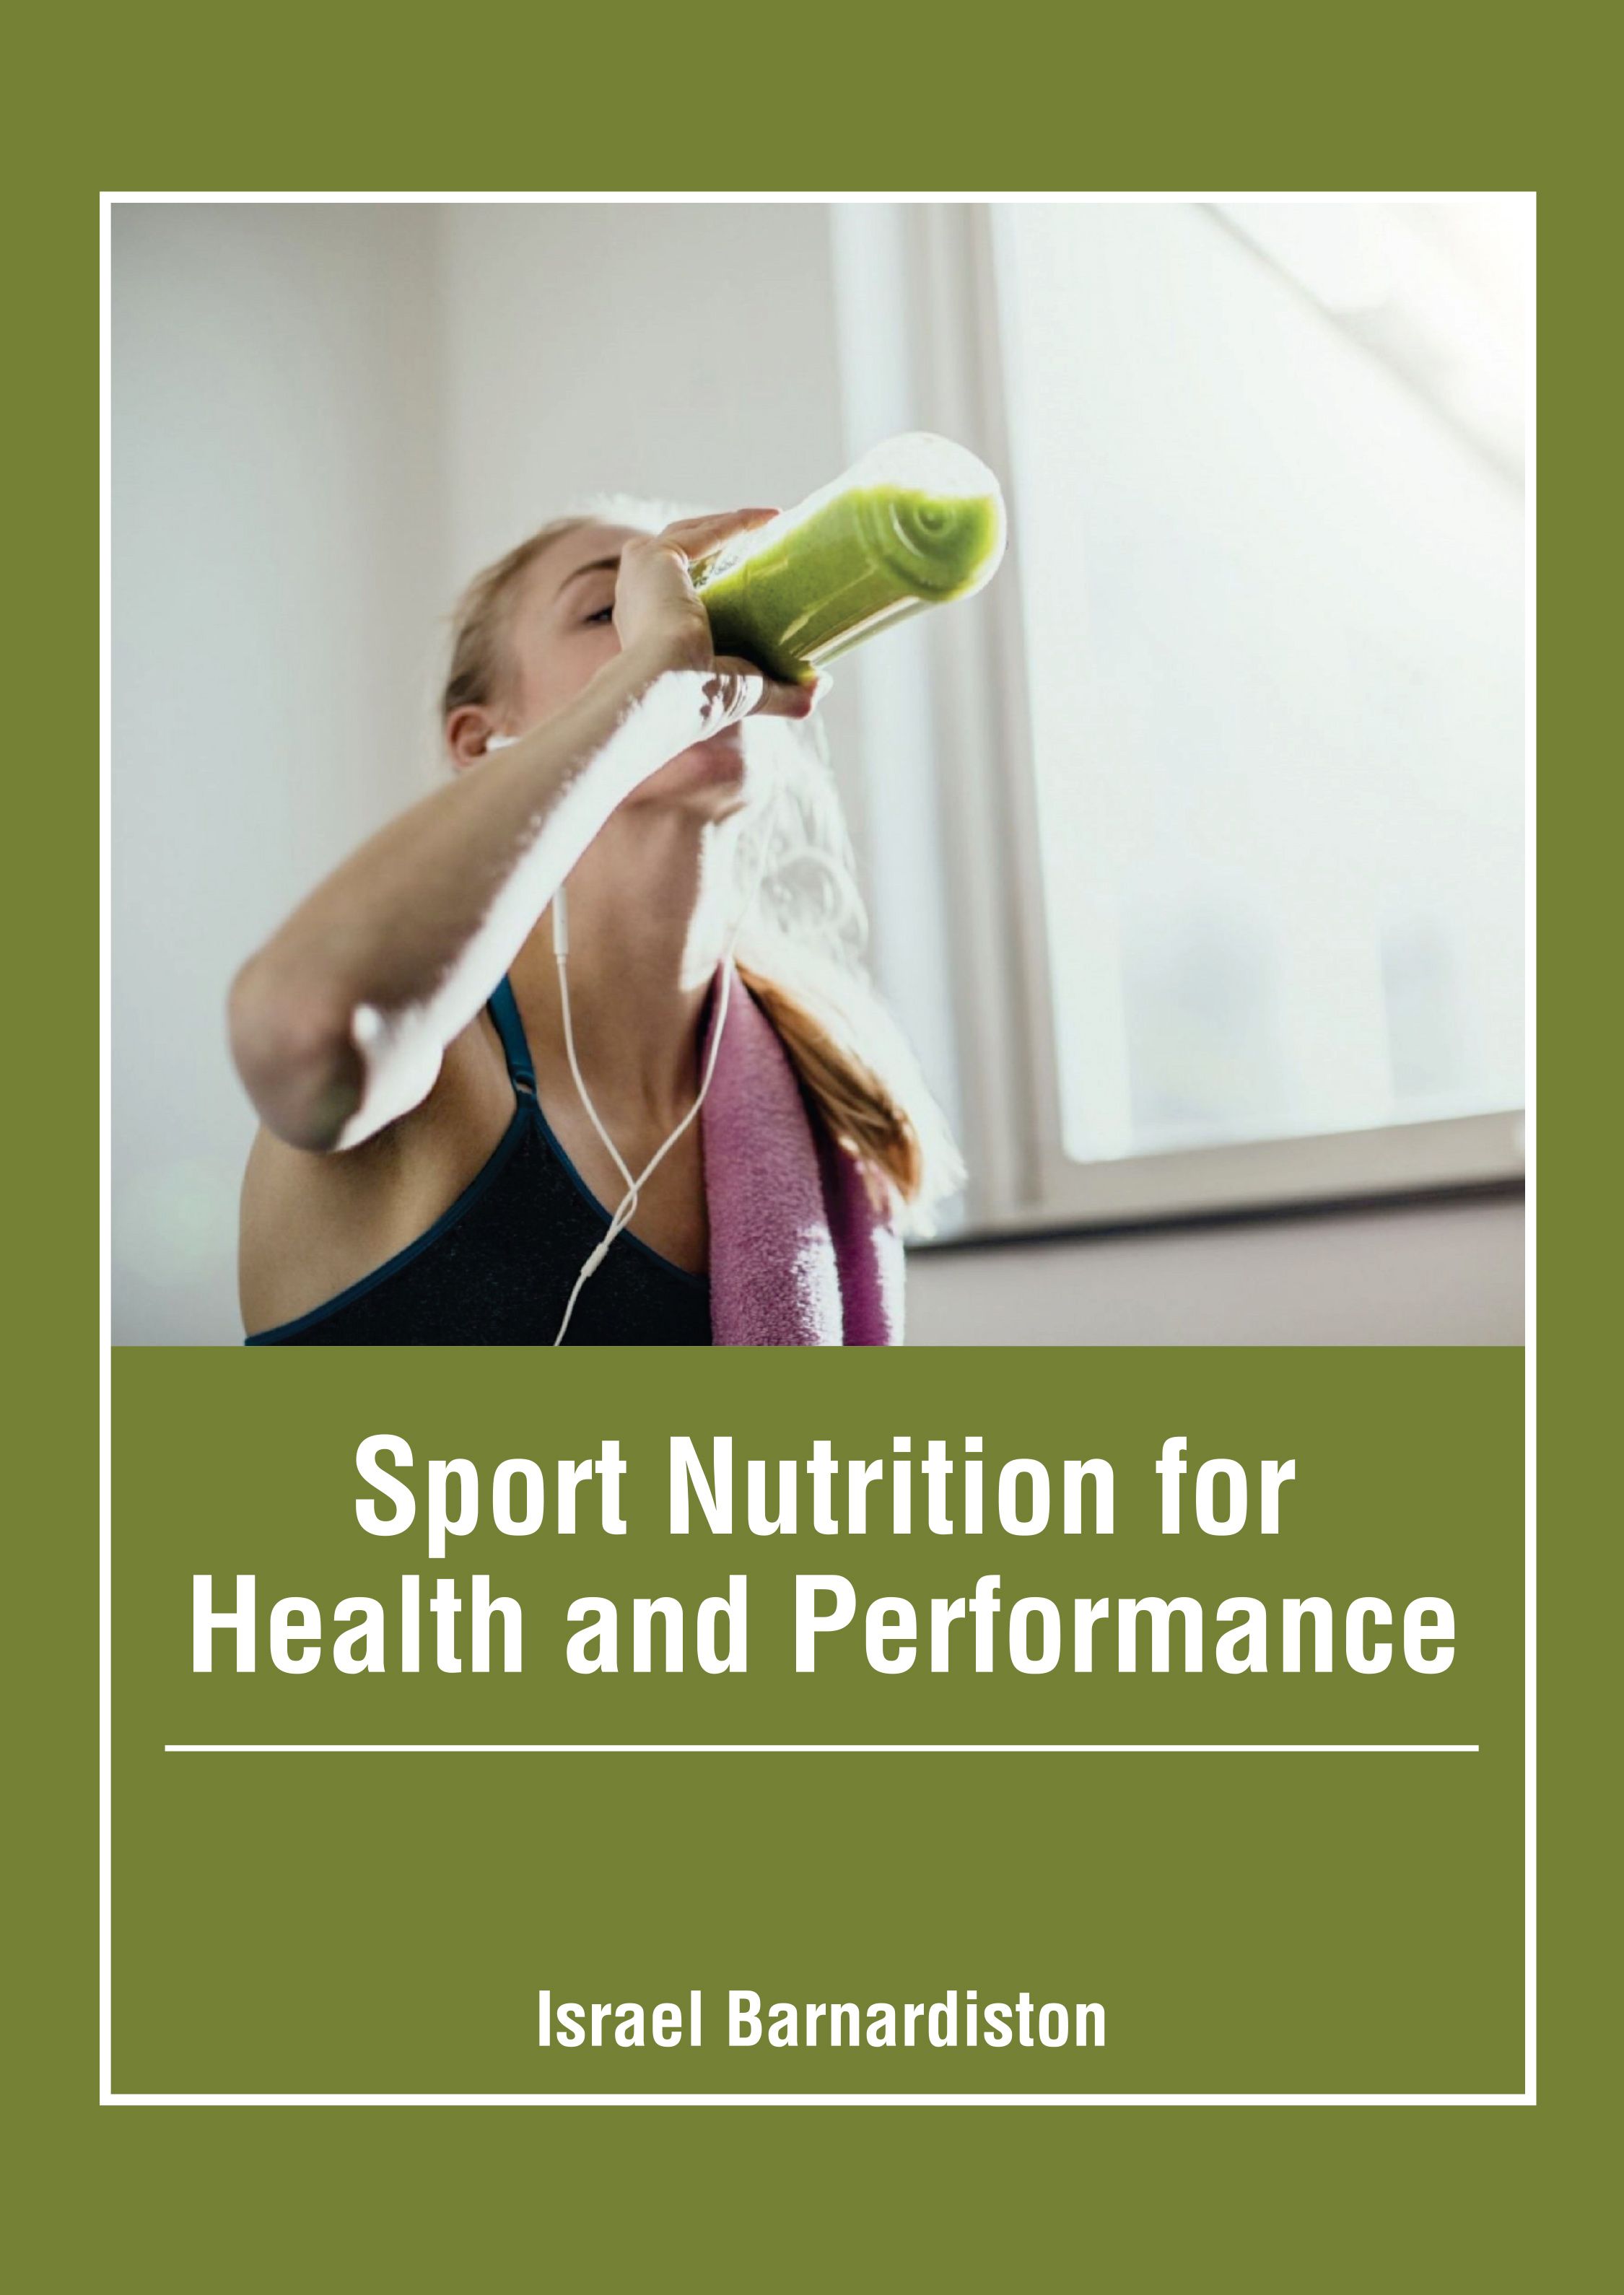 SPORT NUTRITION FOR HEALTH AND PERFORMANCE